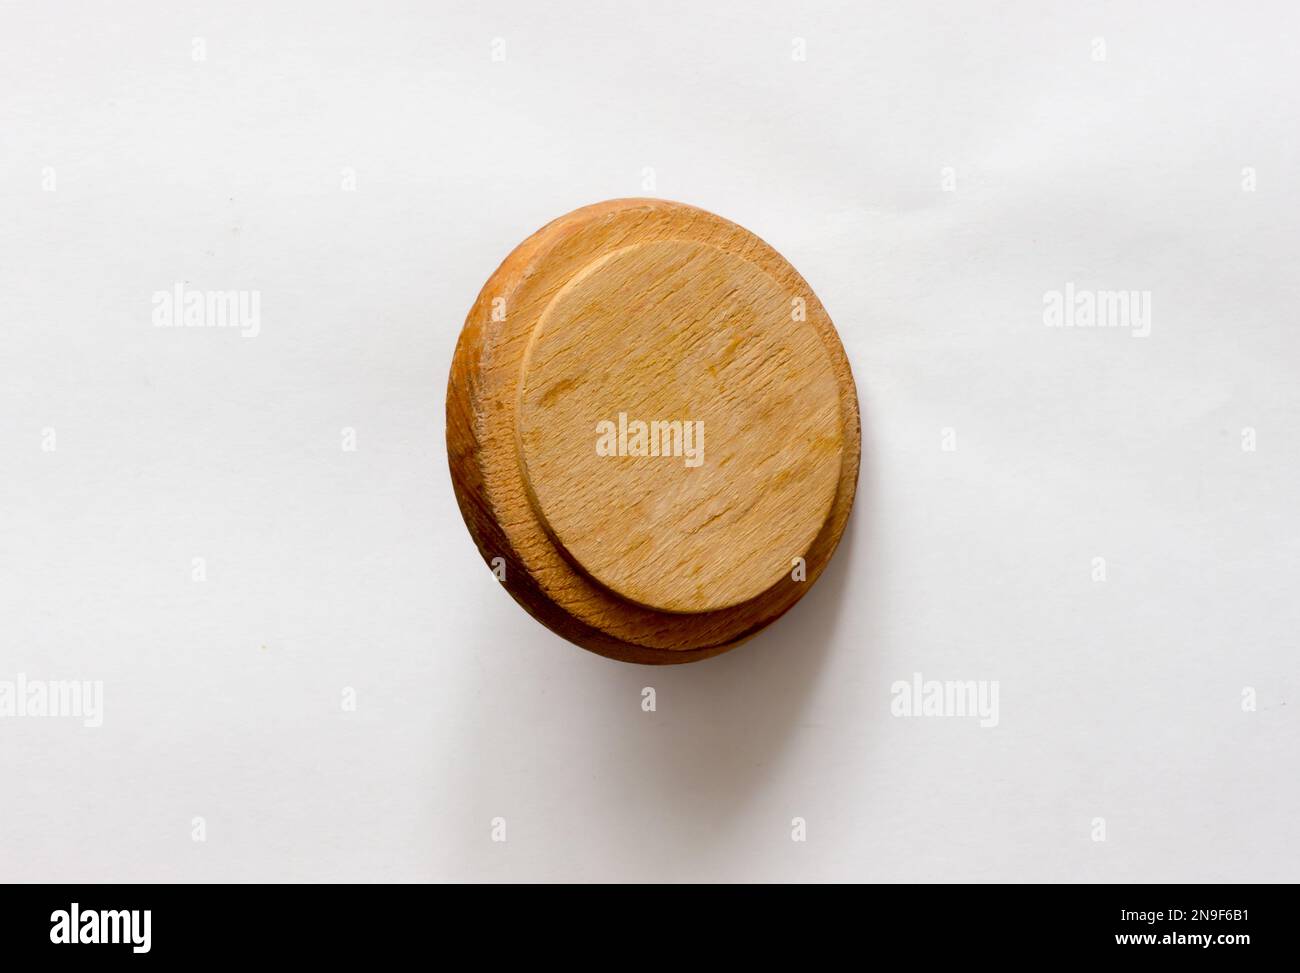 Wooden barrel with a lid. Stock Photo